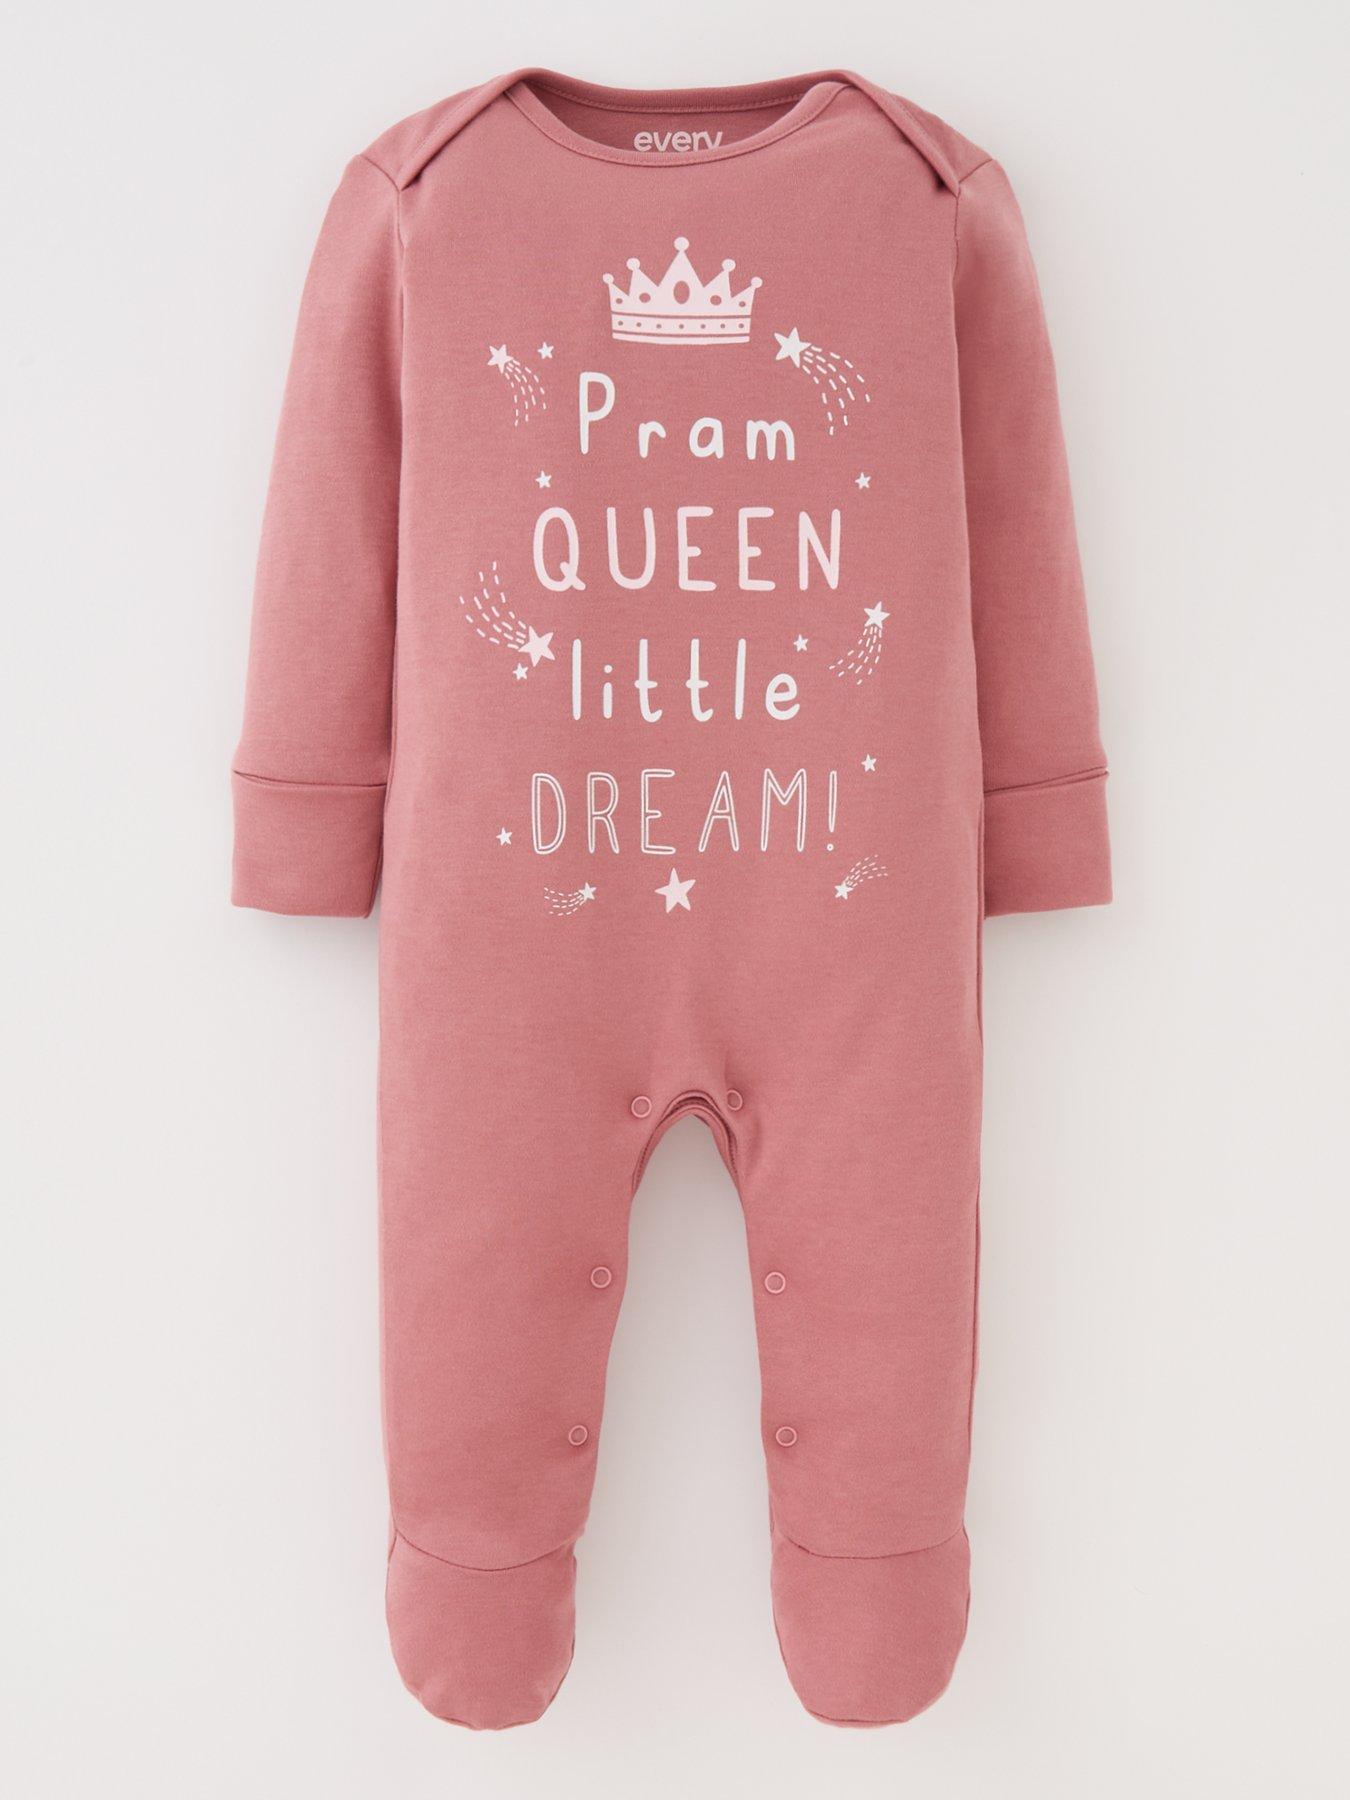 Baby Pink | Very baby | & Ireland Gifts clothes | | Child